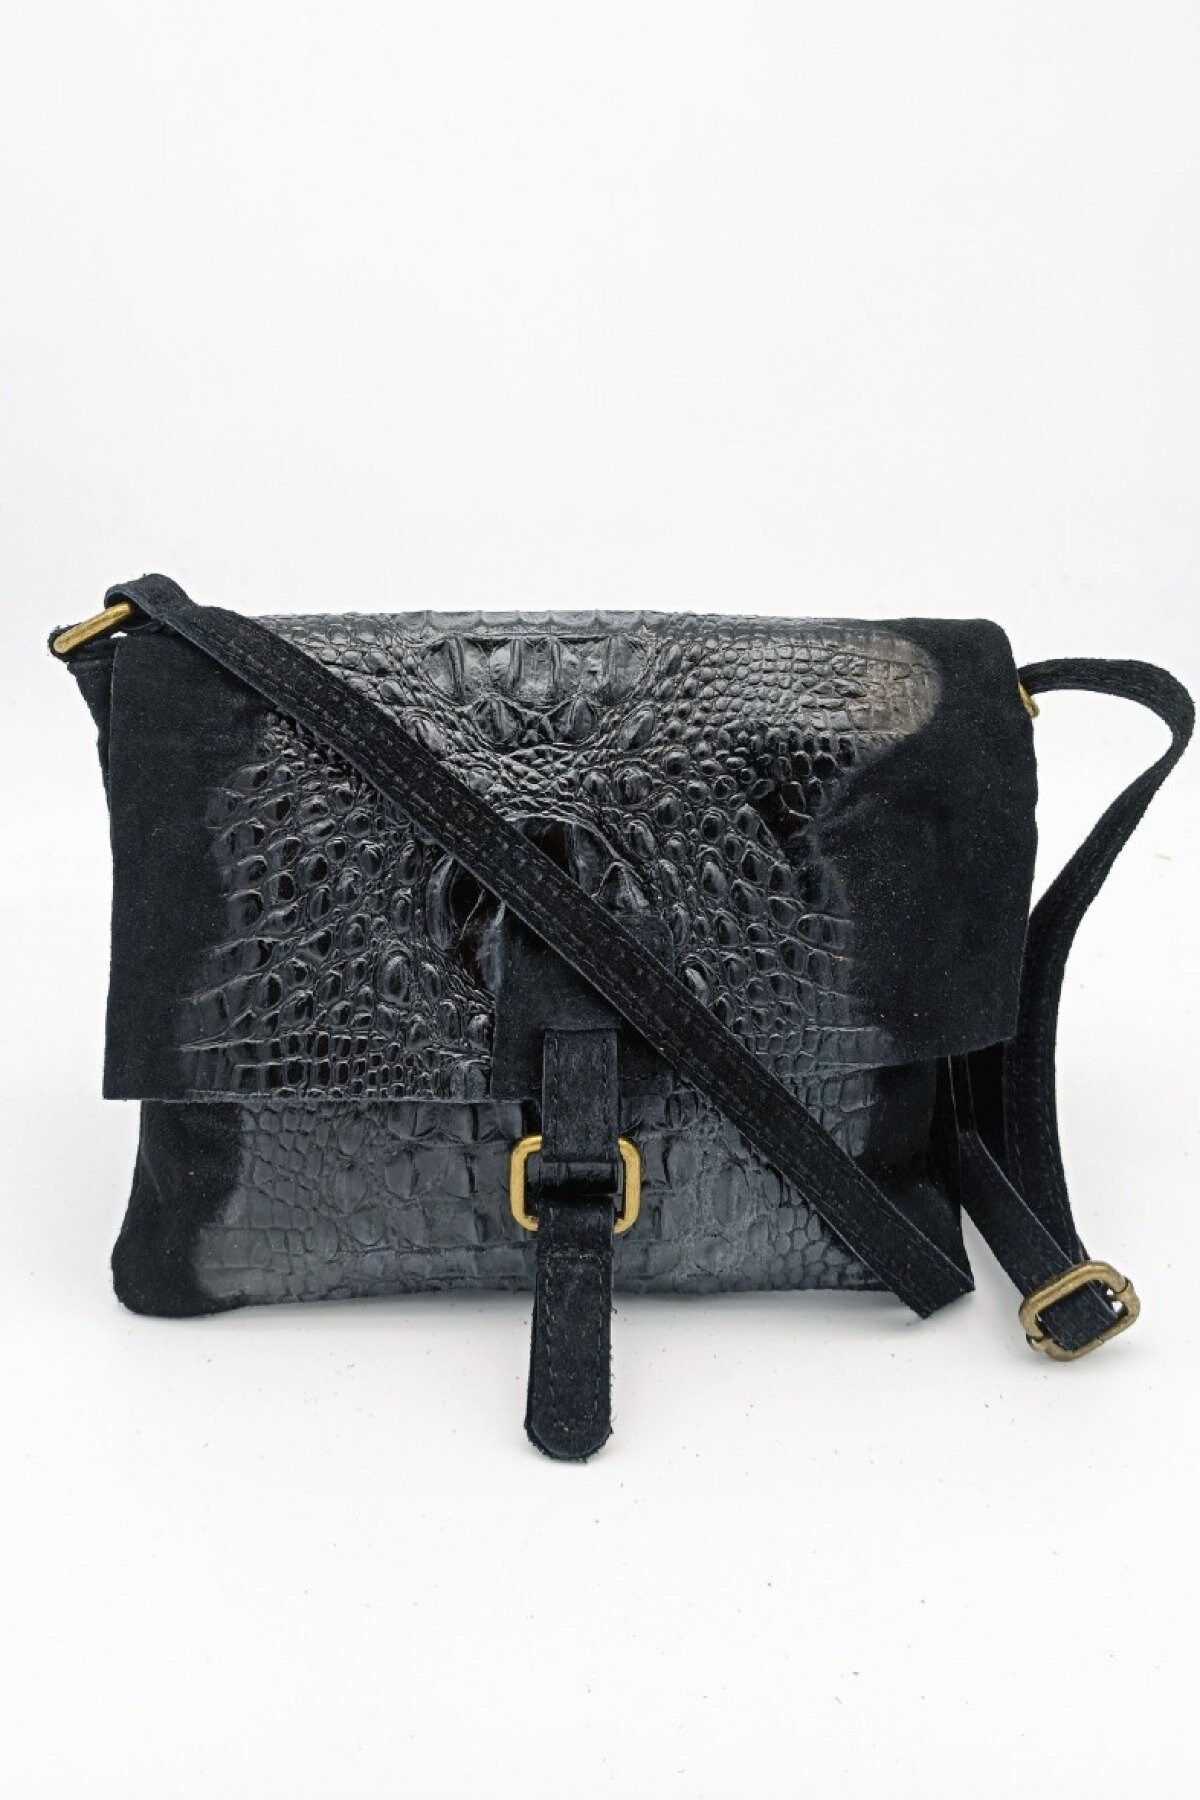 Black Leather L5 Bag Closure With Gold Ring and Magnetic Buckle, Crocheting  Bag, Knitting Bags, DIY Leather Bags. 